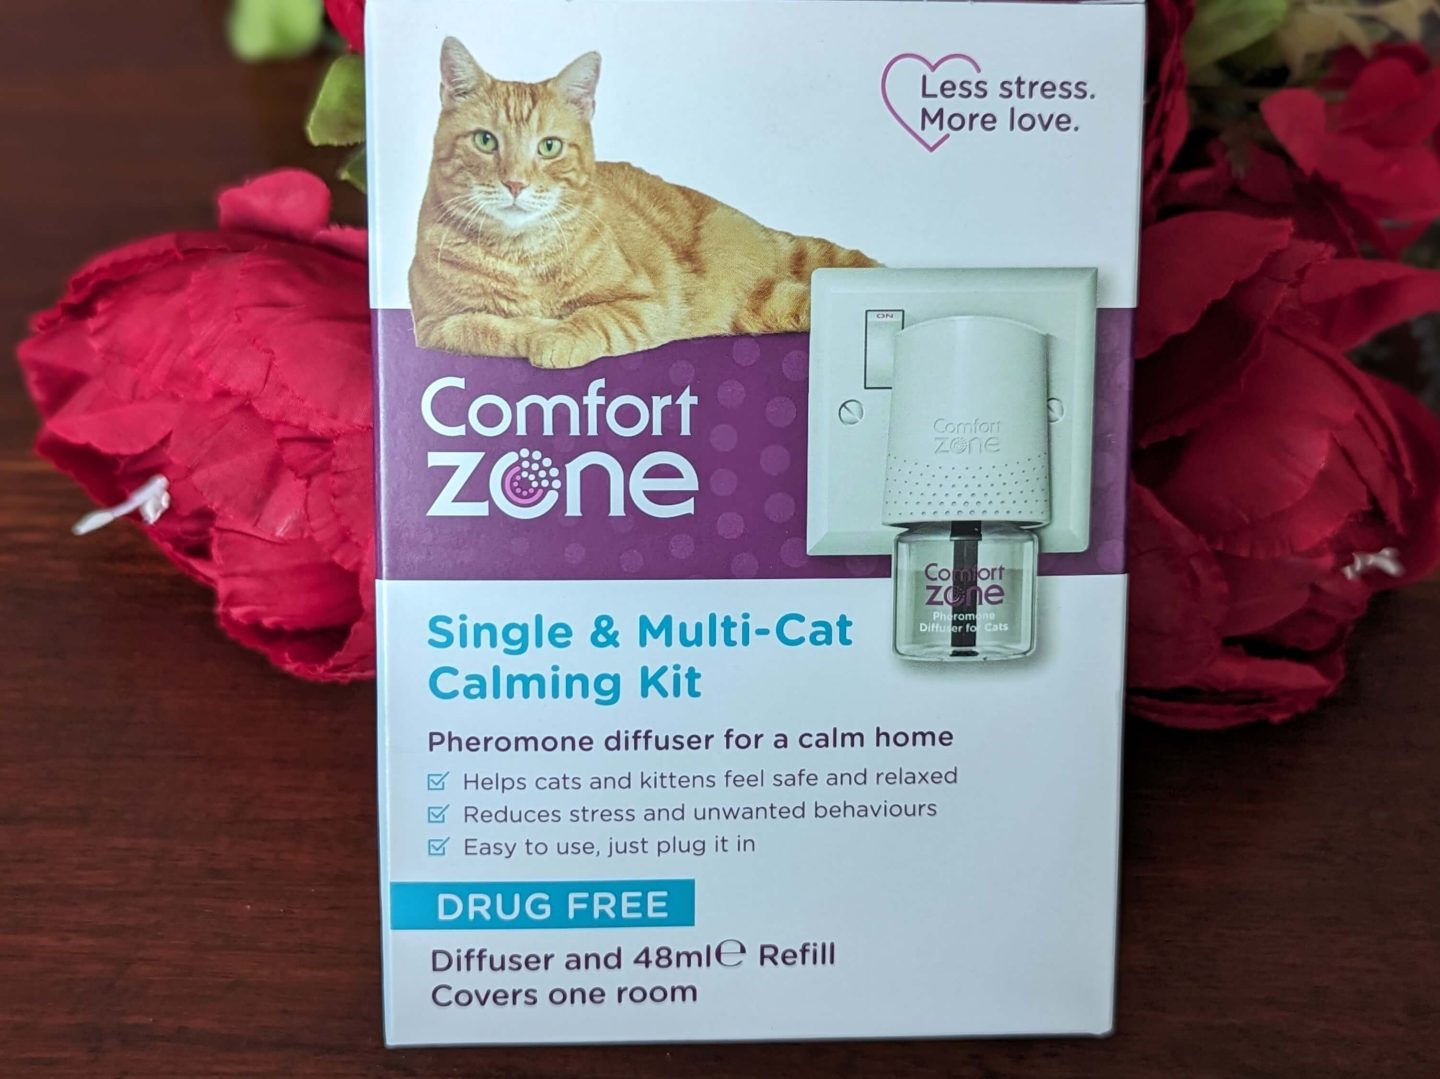 Comfort Zone Calming Diffuser for Cats displayed against a wooden background propped up by red flowers - something you need for cats in the four gift rule Christmas gift guide